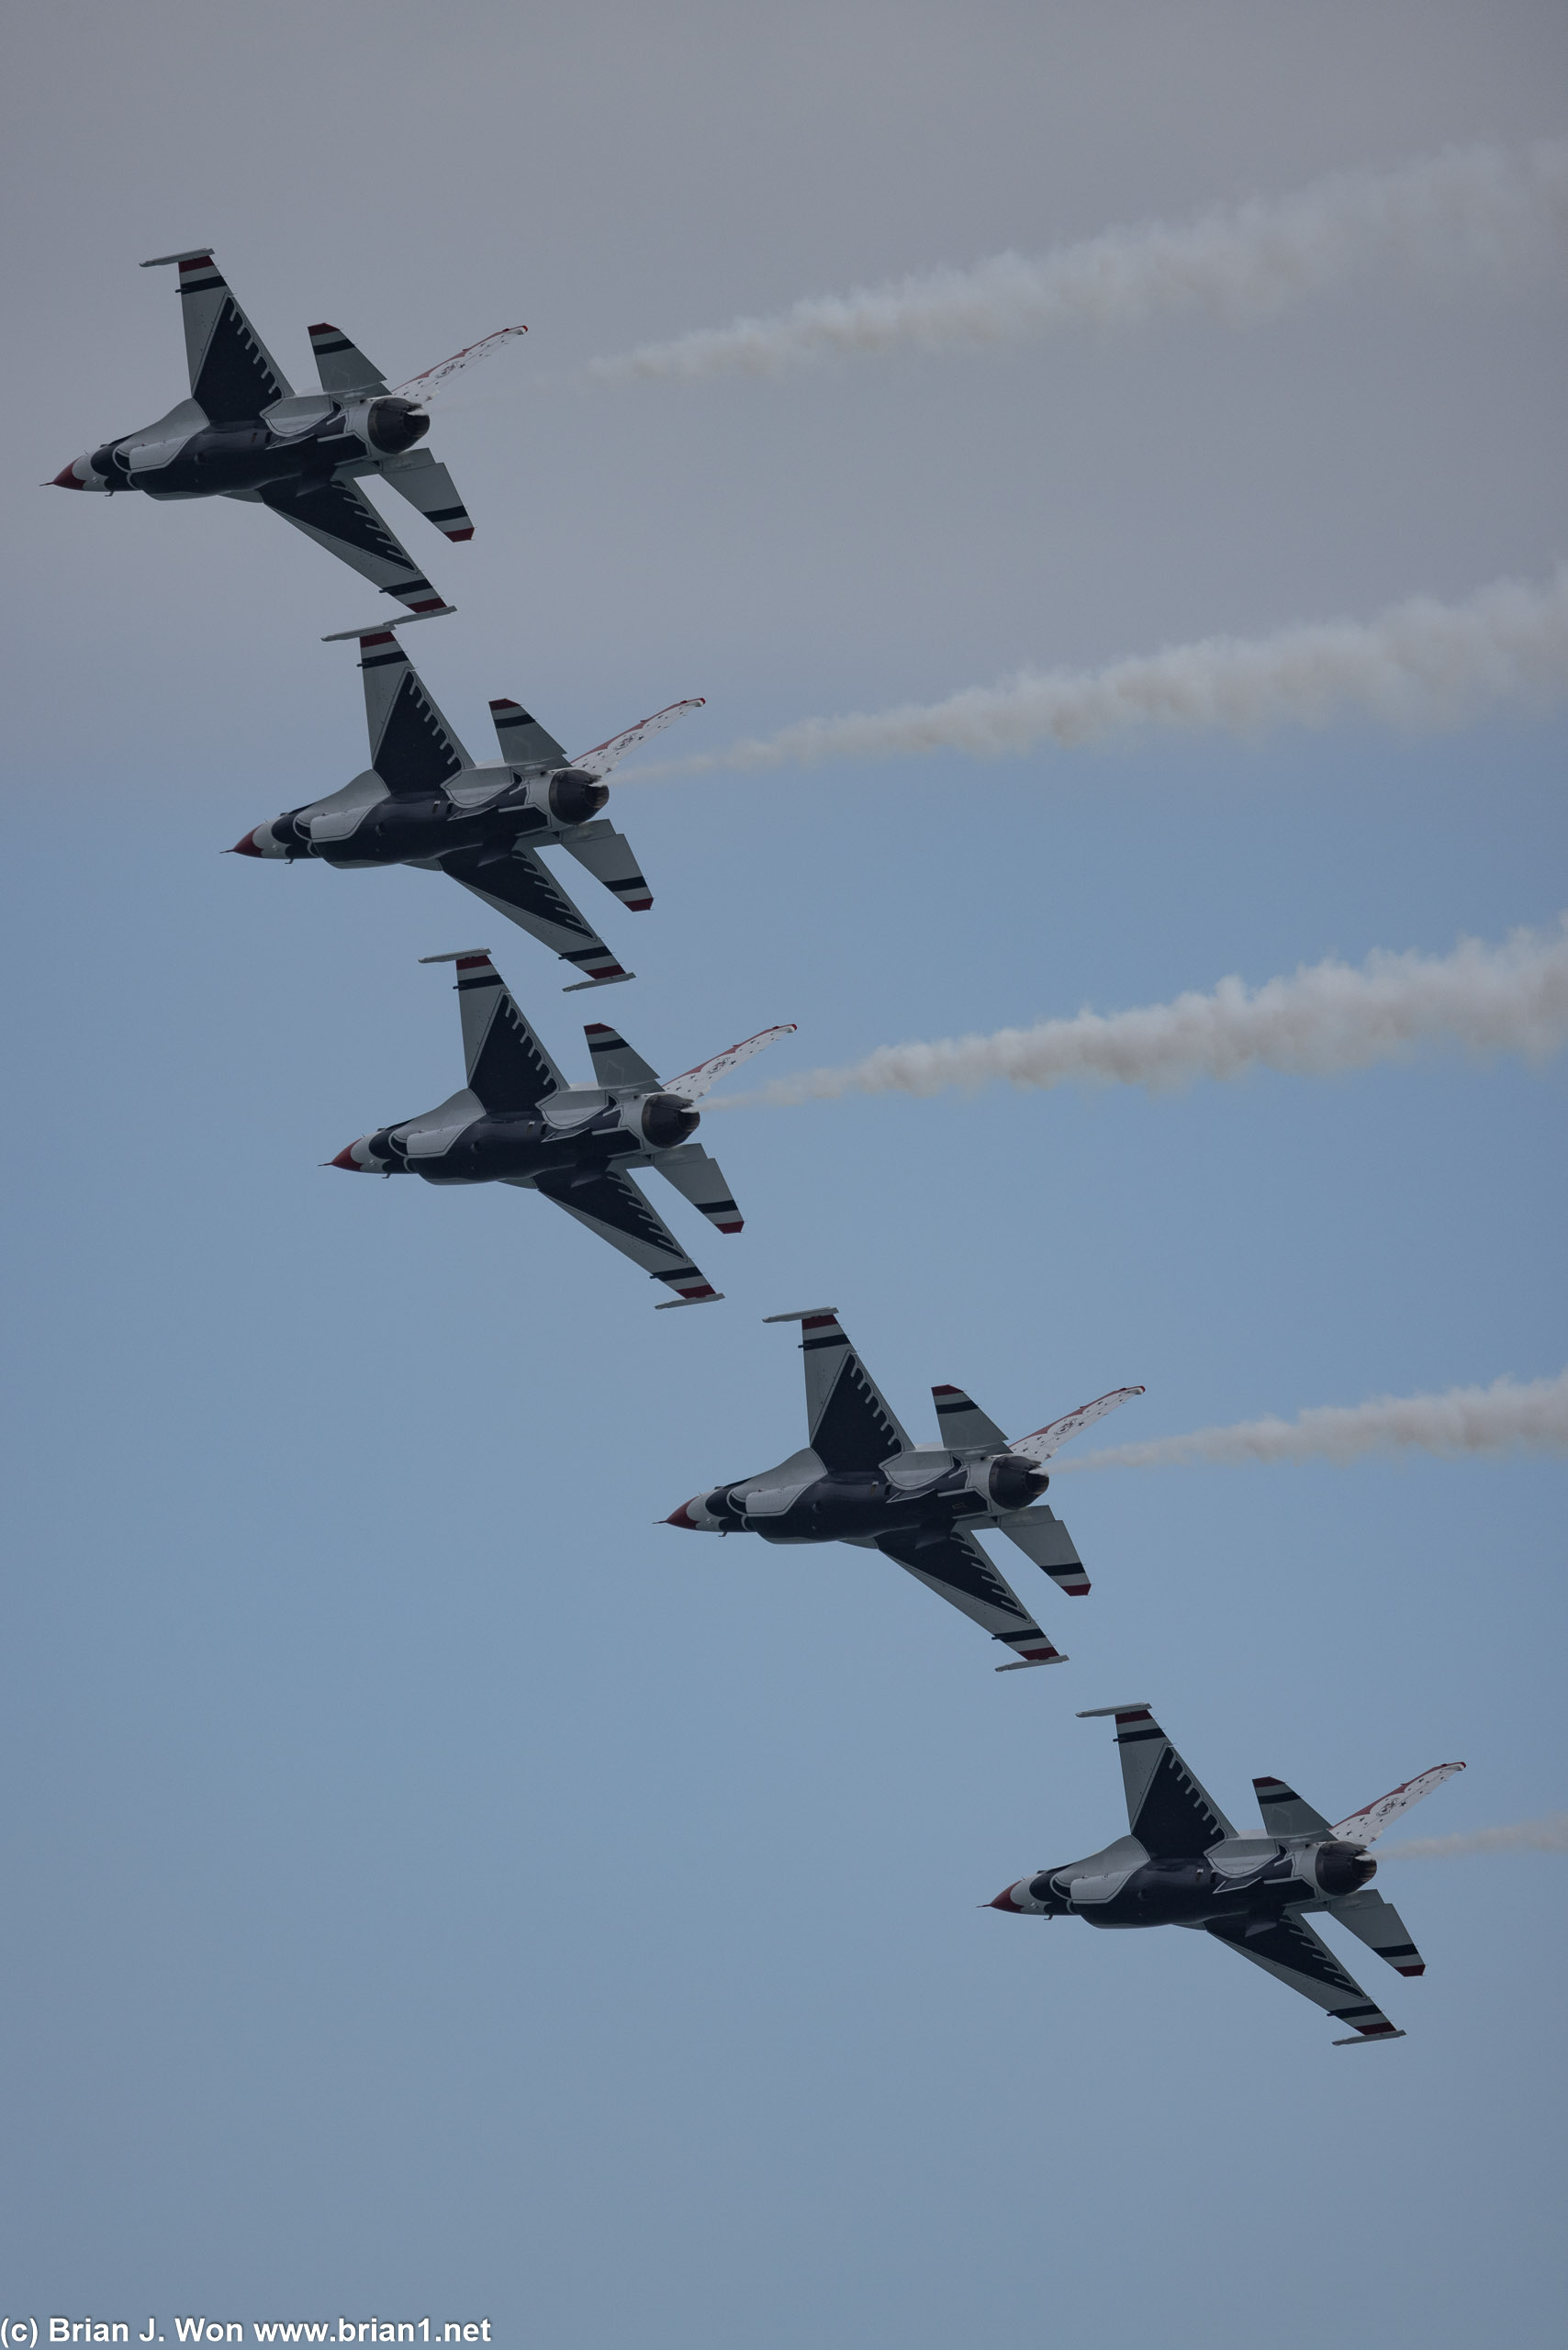 Five USAF Thunderbirds in formation.